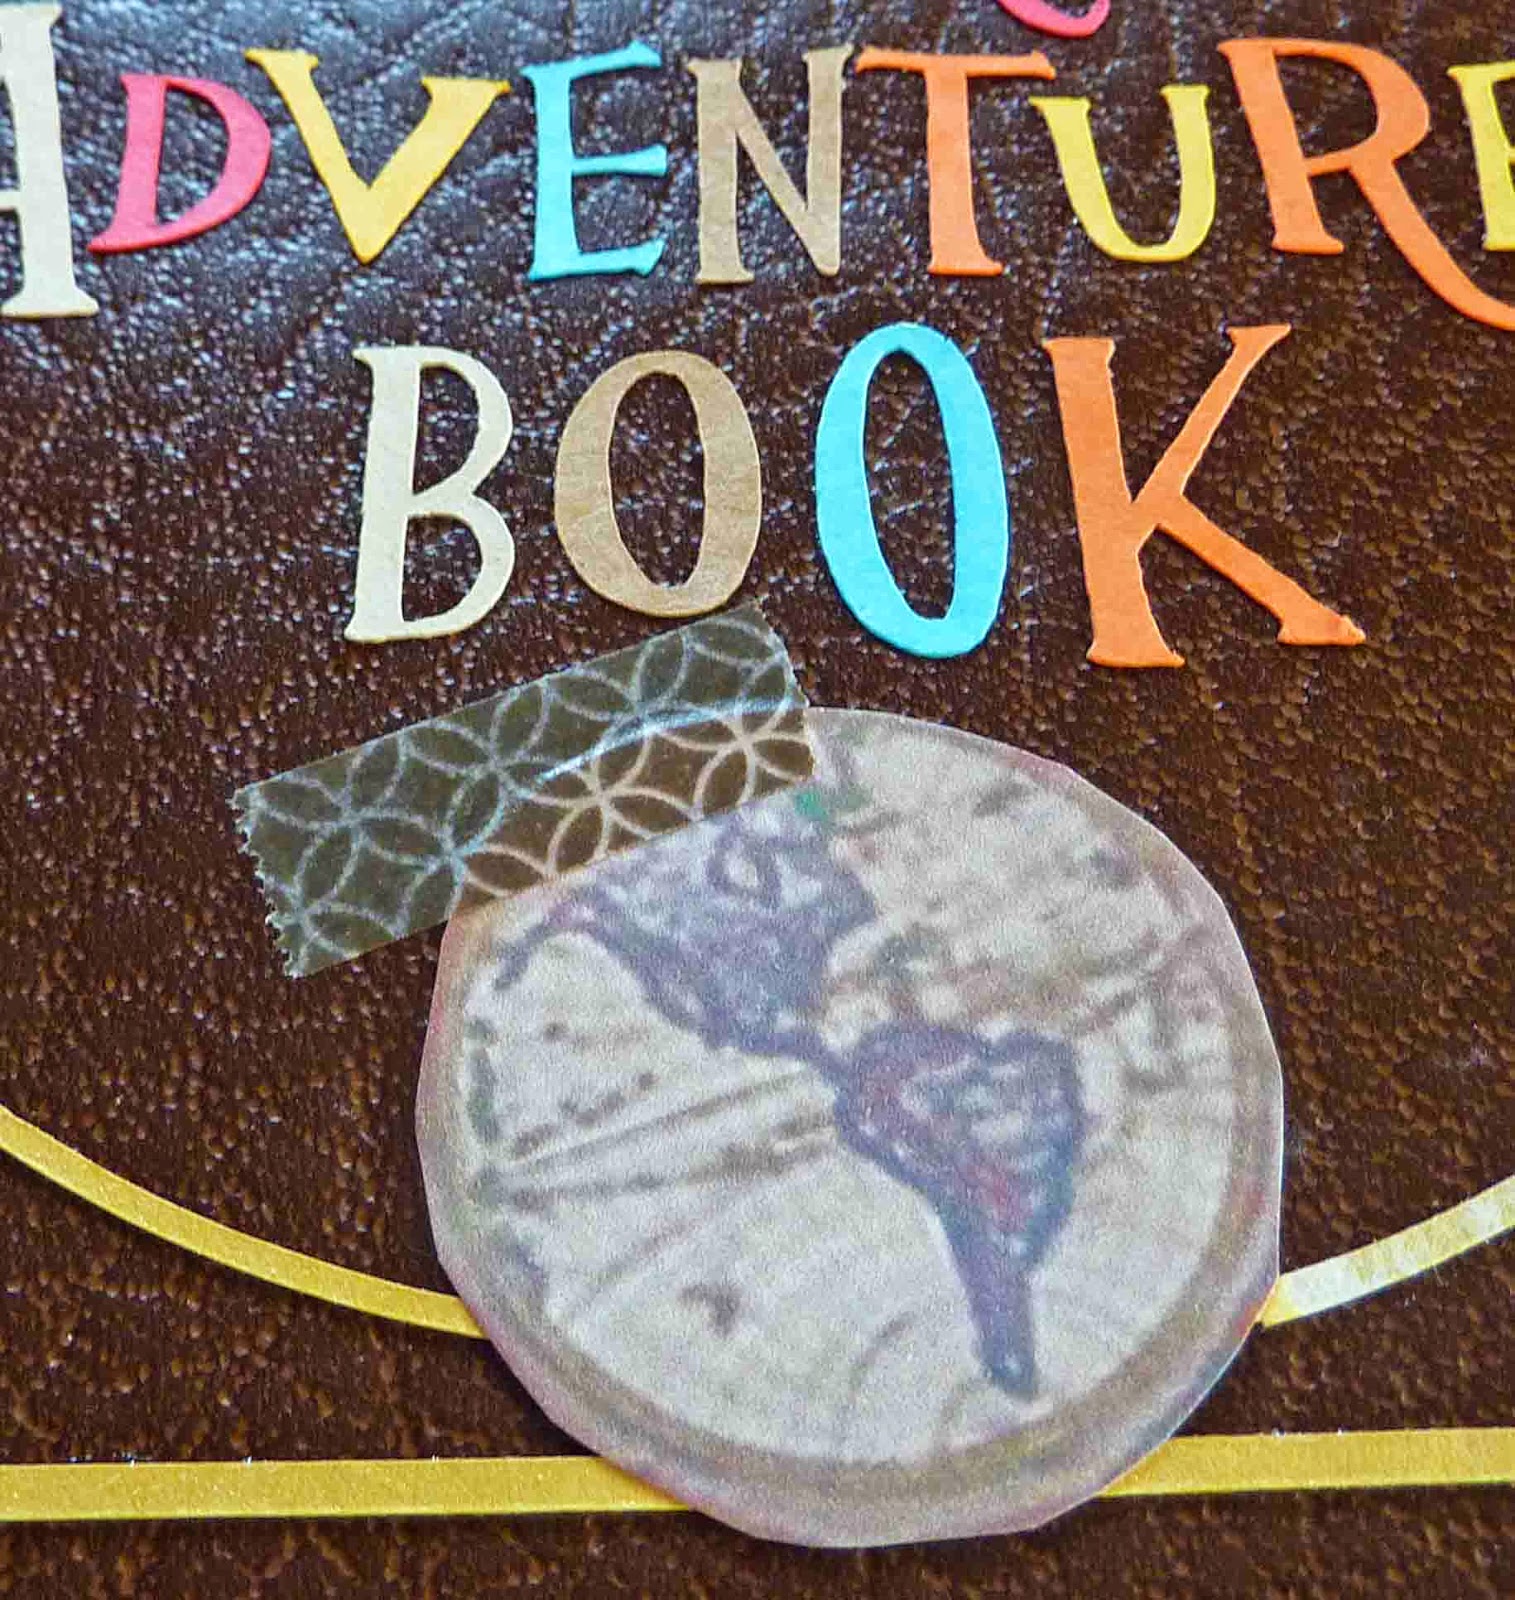 Cool Beans by L.B.: Our Adventure Book - Anything Goes